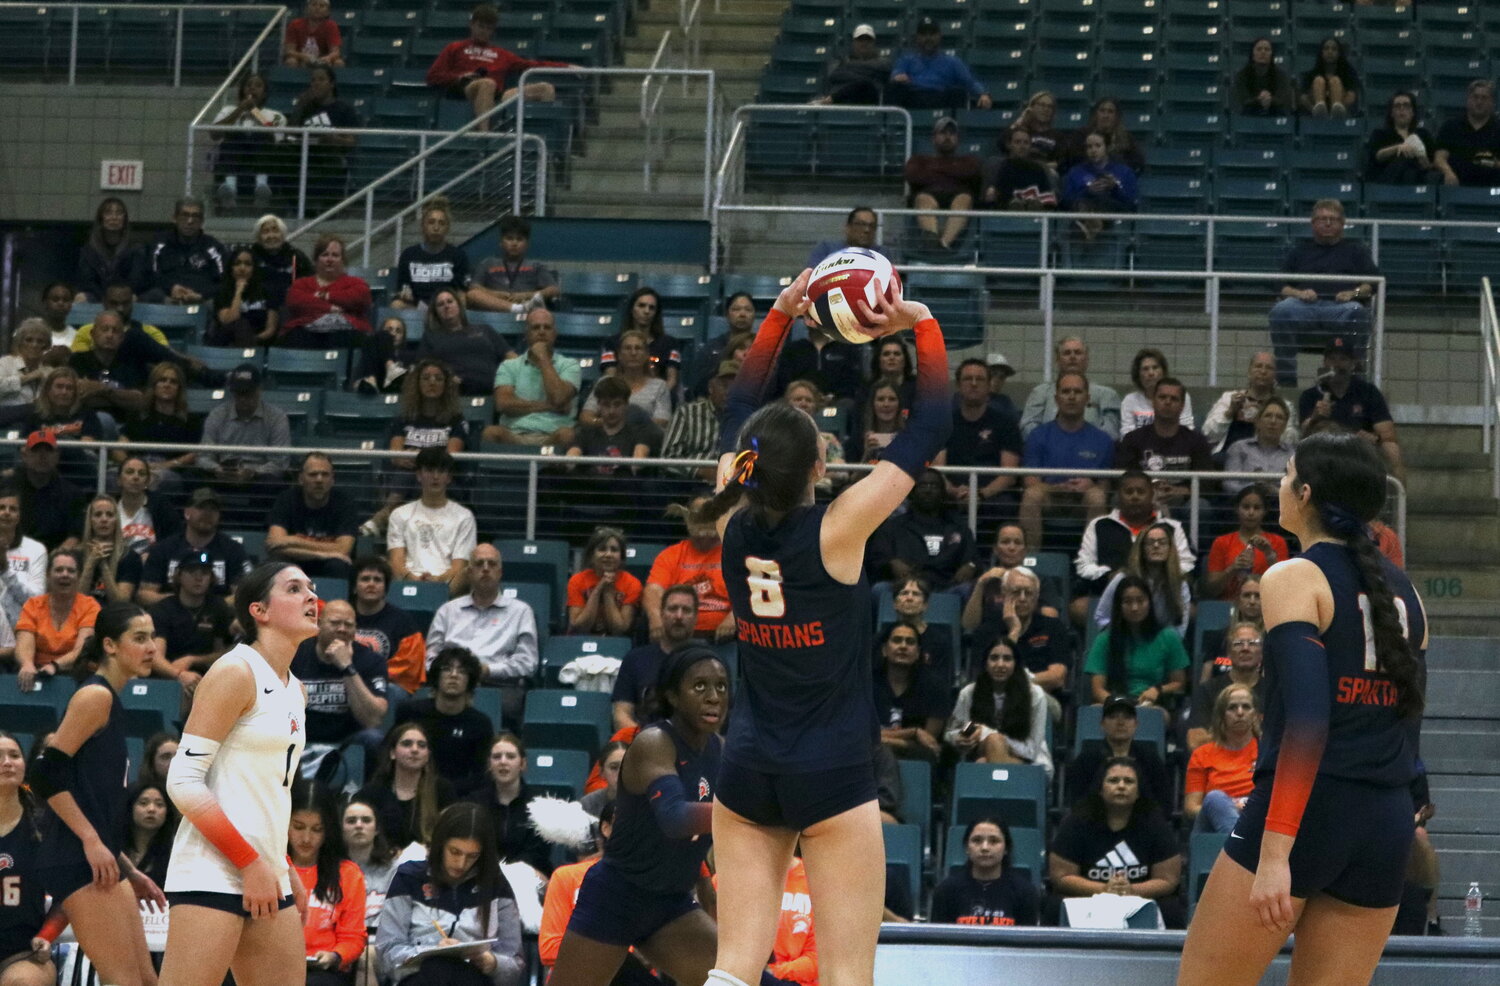 Seven Lakes’ Kate Kuehn sets the ball during Tuesday’s match between Seven Lakes and Tompkins at the Merrell Center.